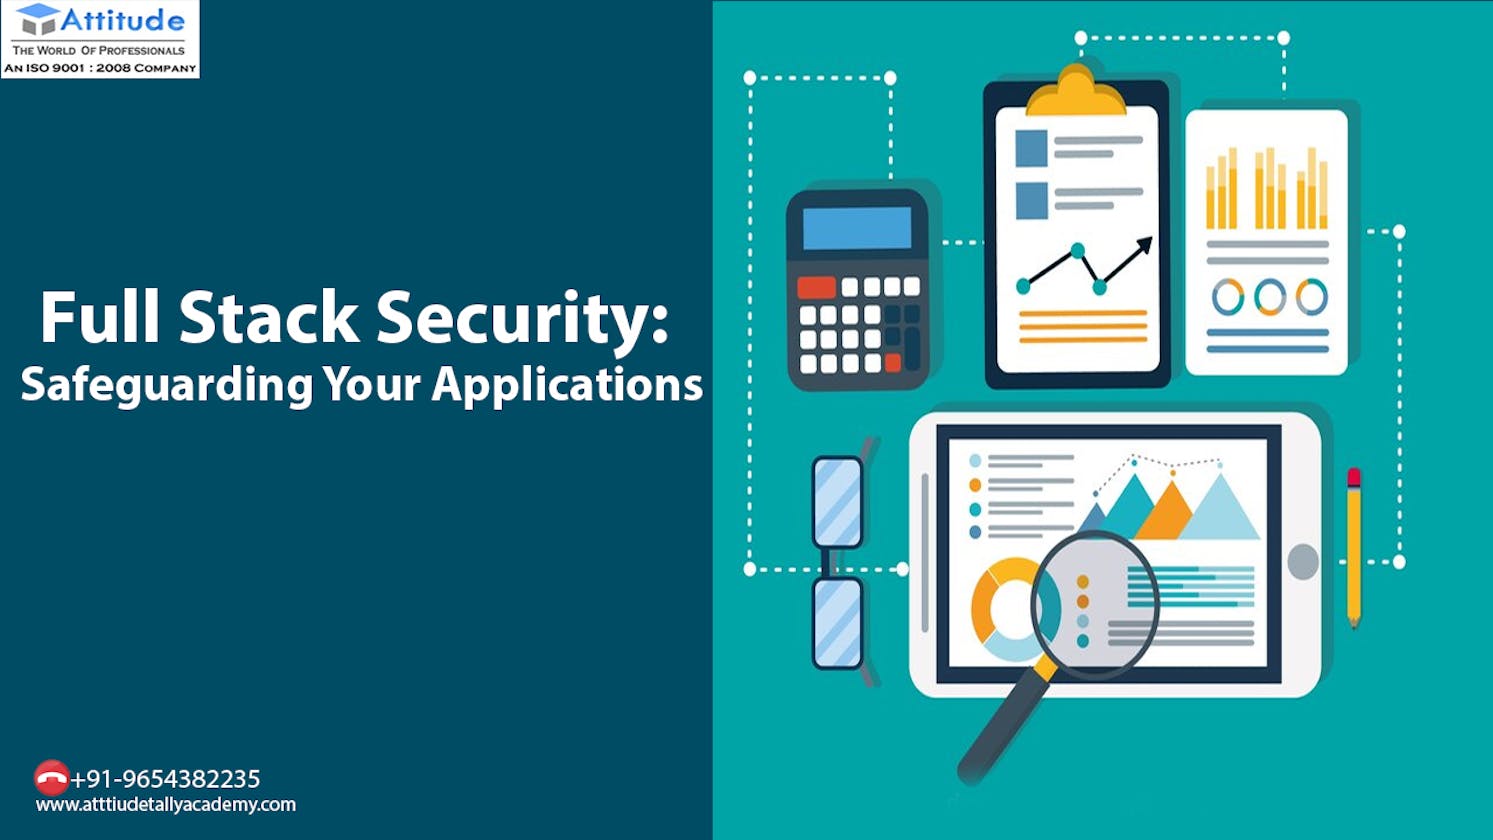 Full Stack Security: Safeguarding Your Applications